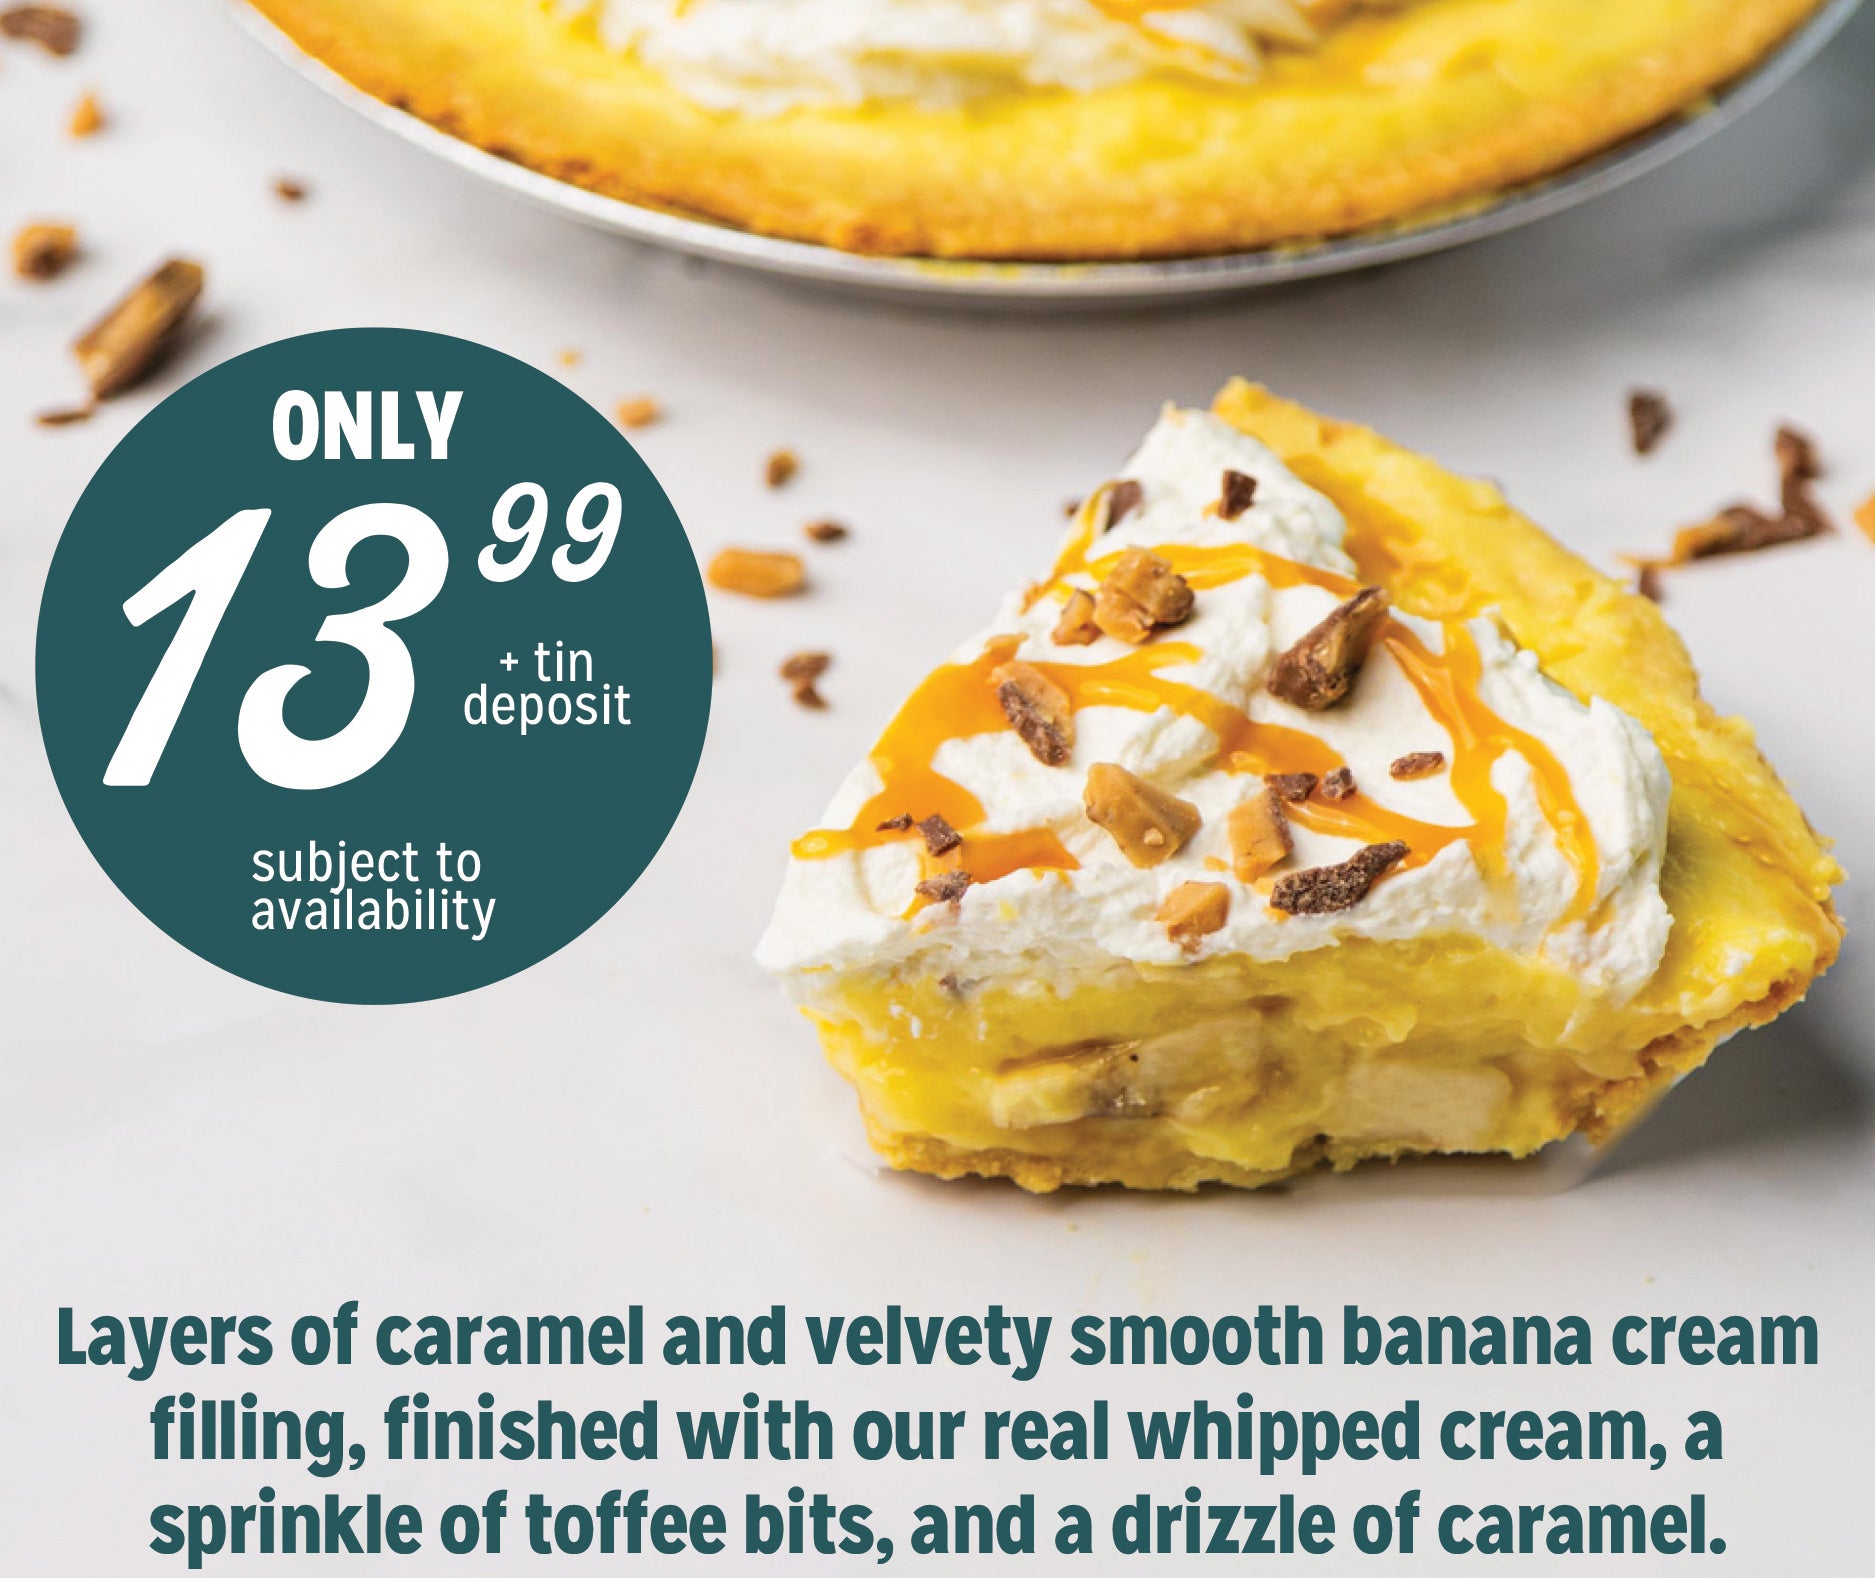 Layers of caramel and velvety smooth banana cream filling, finished with our real whipped cream, a sprinkle of toffee bits, and a drizzle of caramel. Only 13.99!